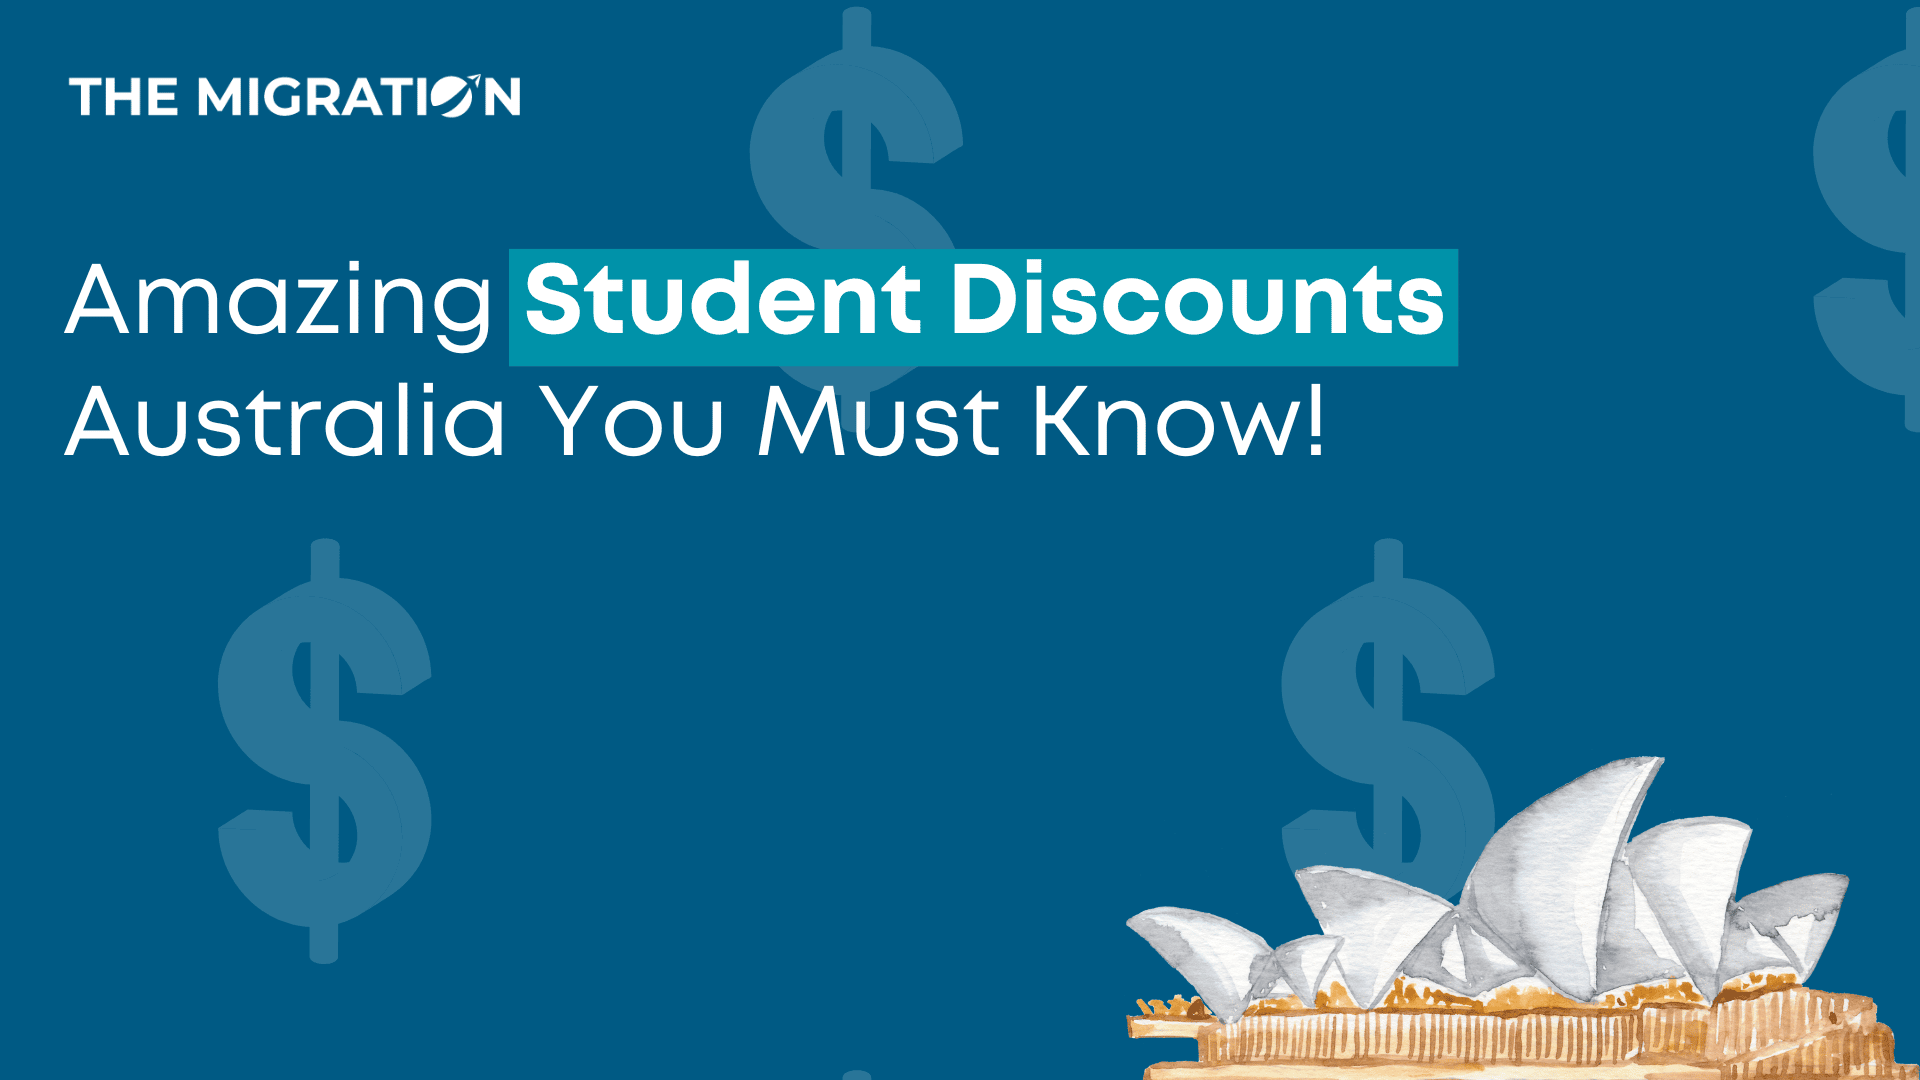 7 Amazing Student Discounts Australia You Must Know!